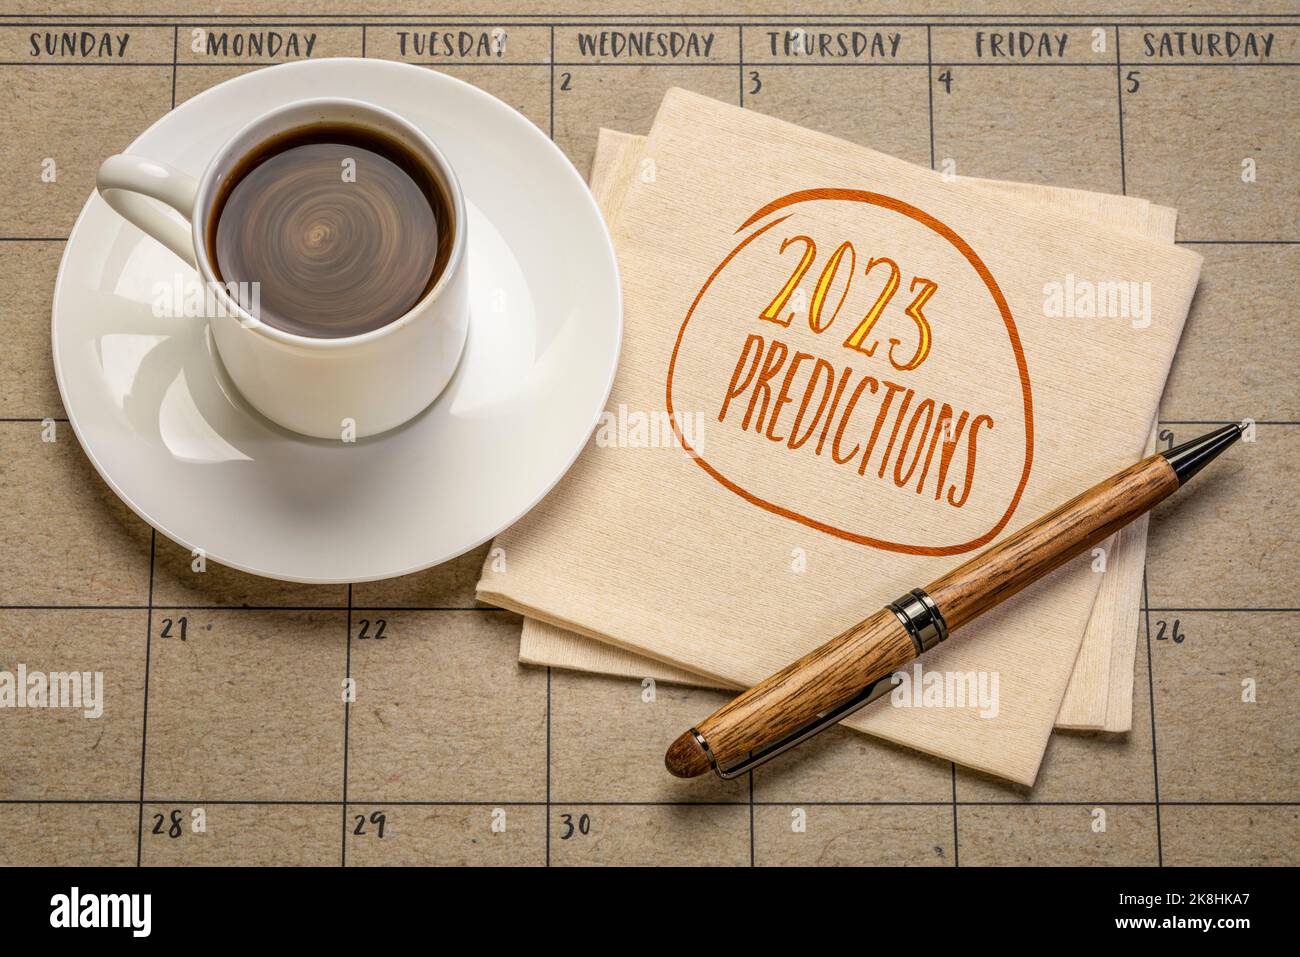 2023 predictions - handwriting on a napkin with a cup of coffee, business and financial trends and expectations in New Year Stock Photo